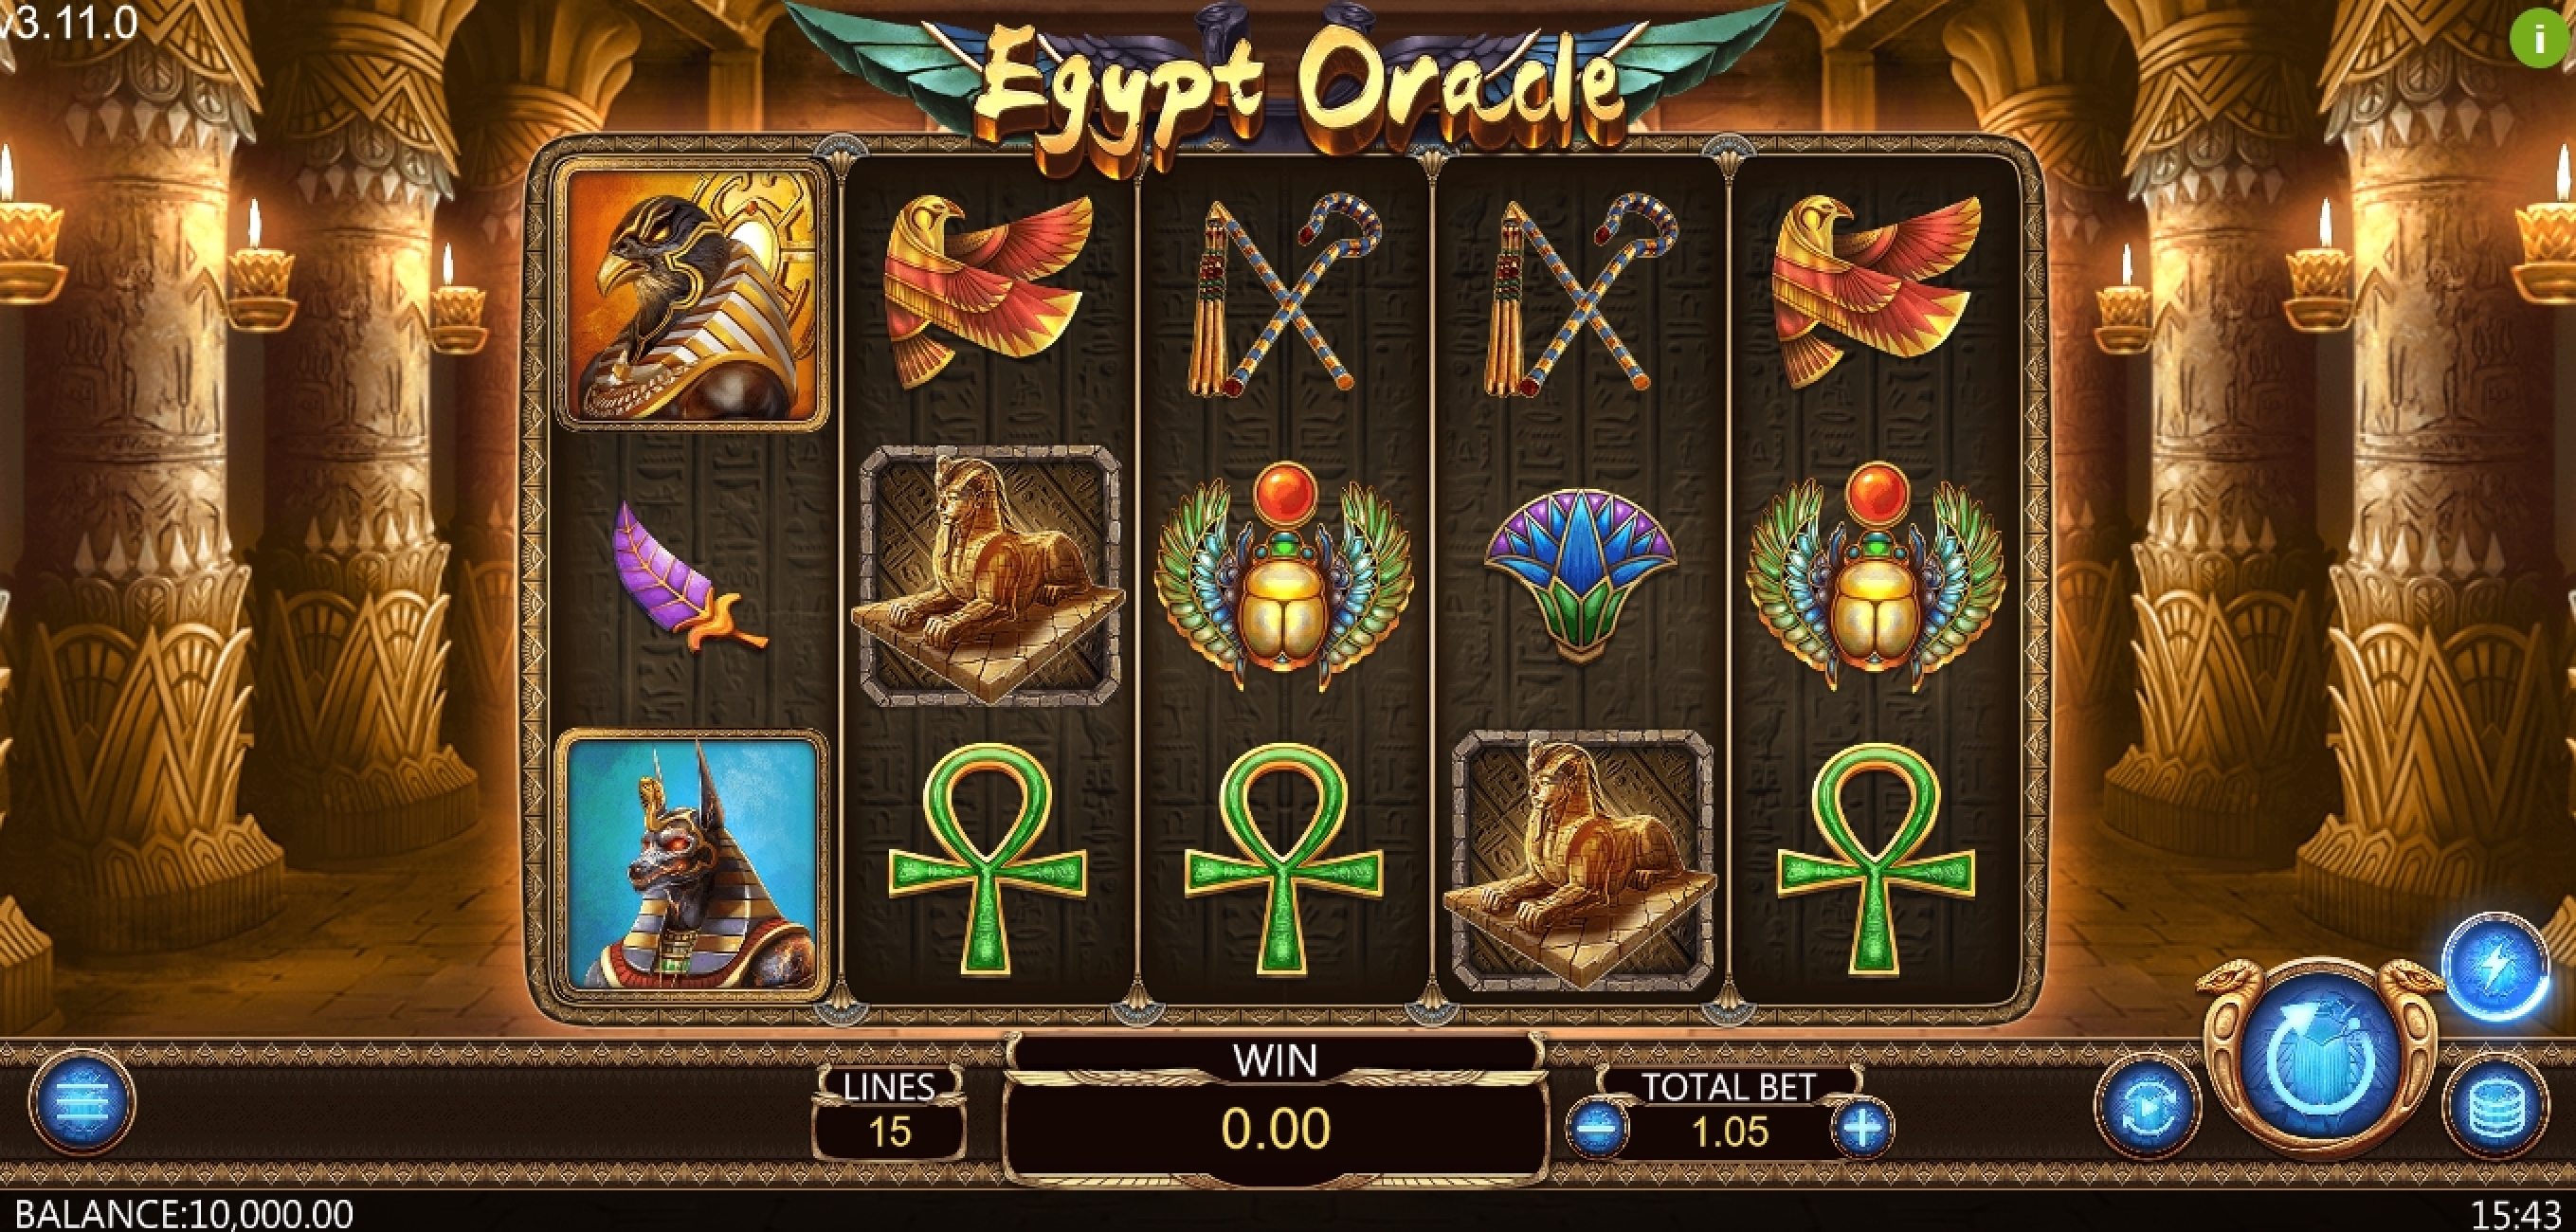 Reels in Egypt Oracle Slot Game by Dragoon Soft